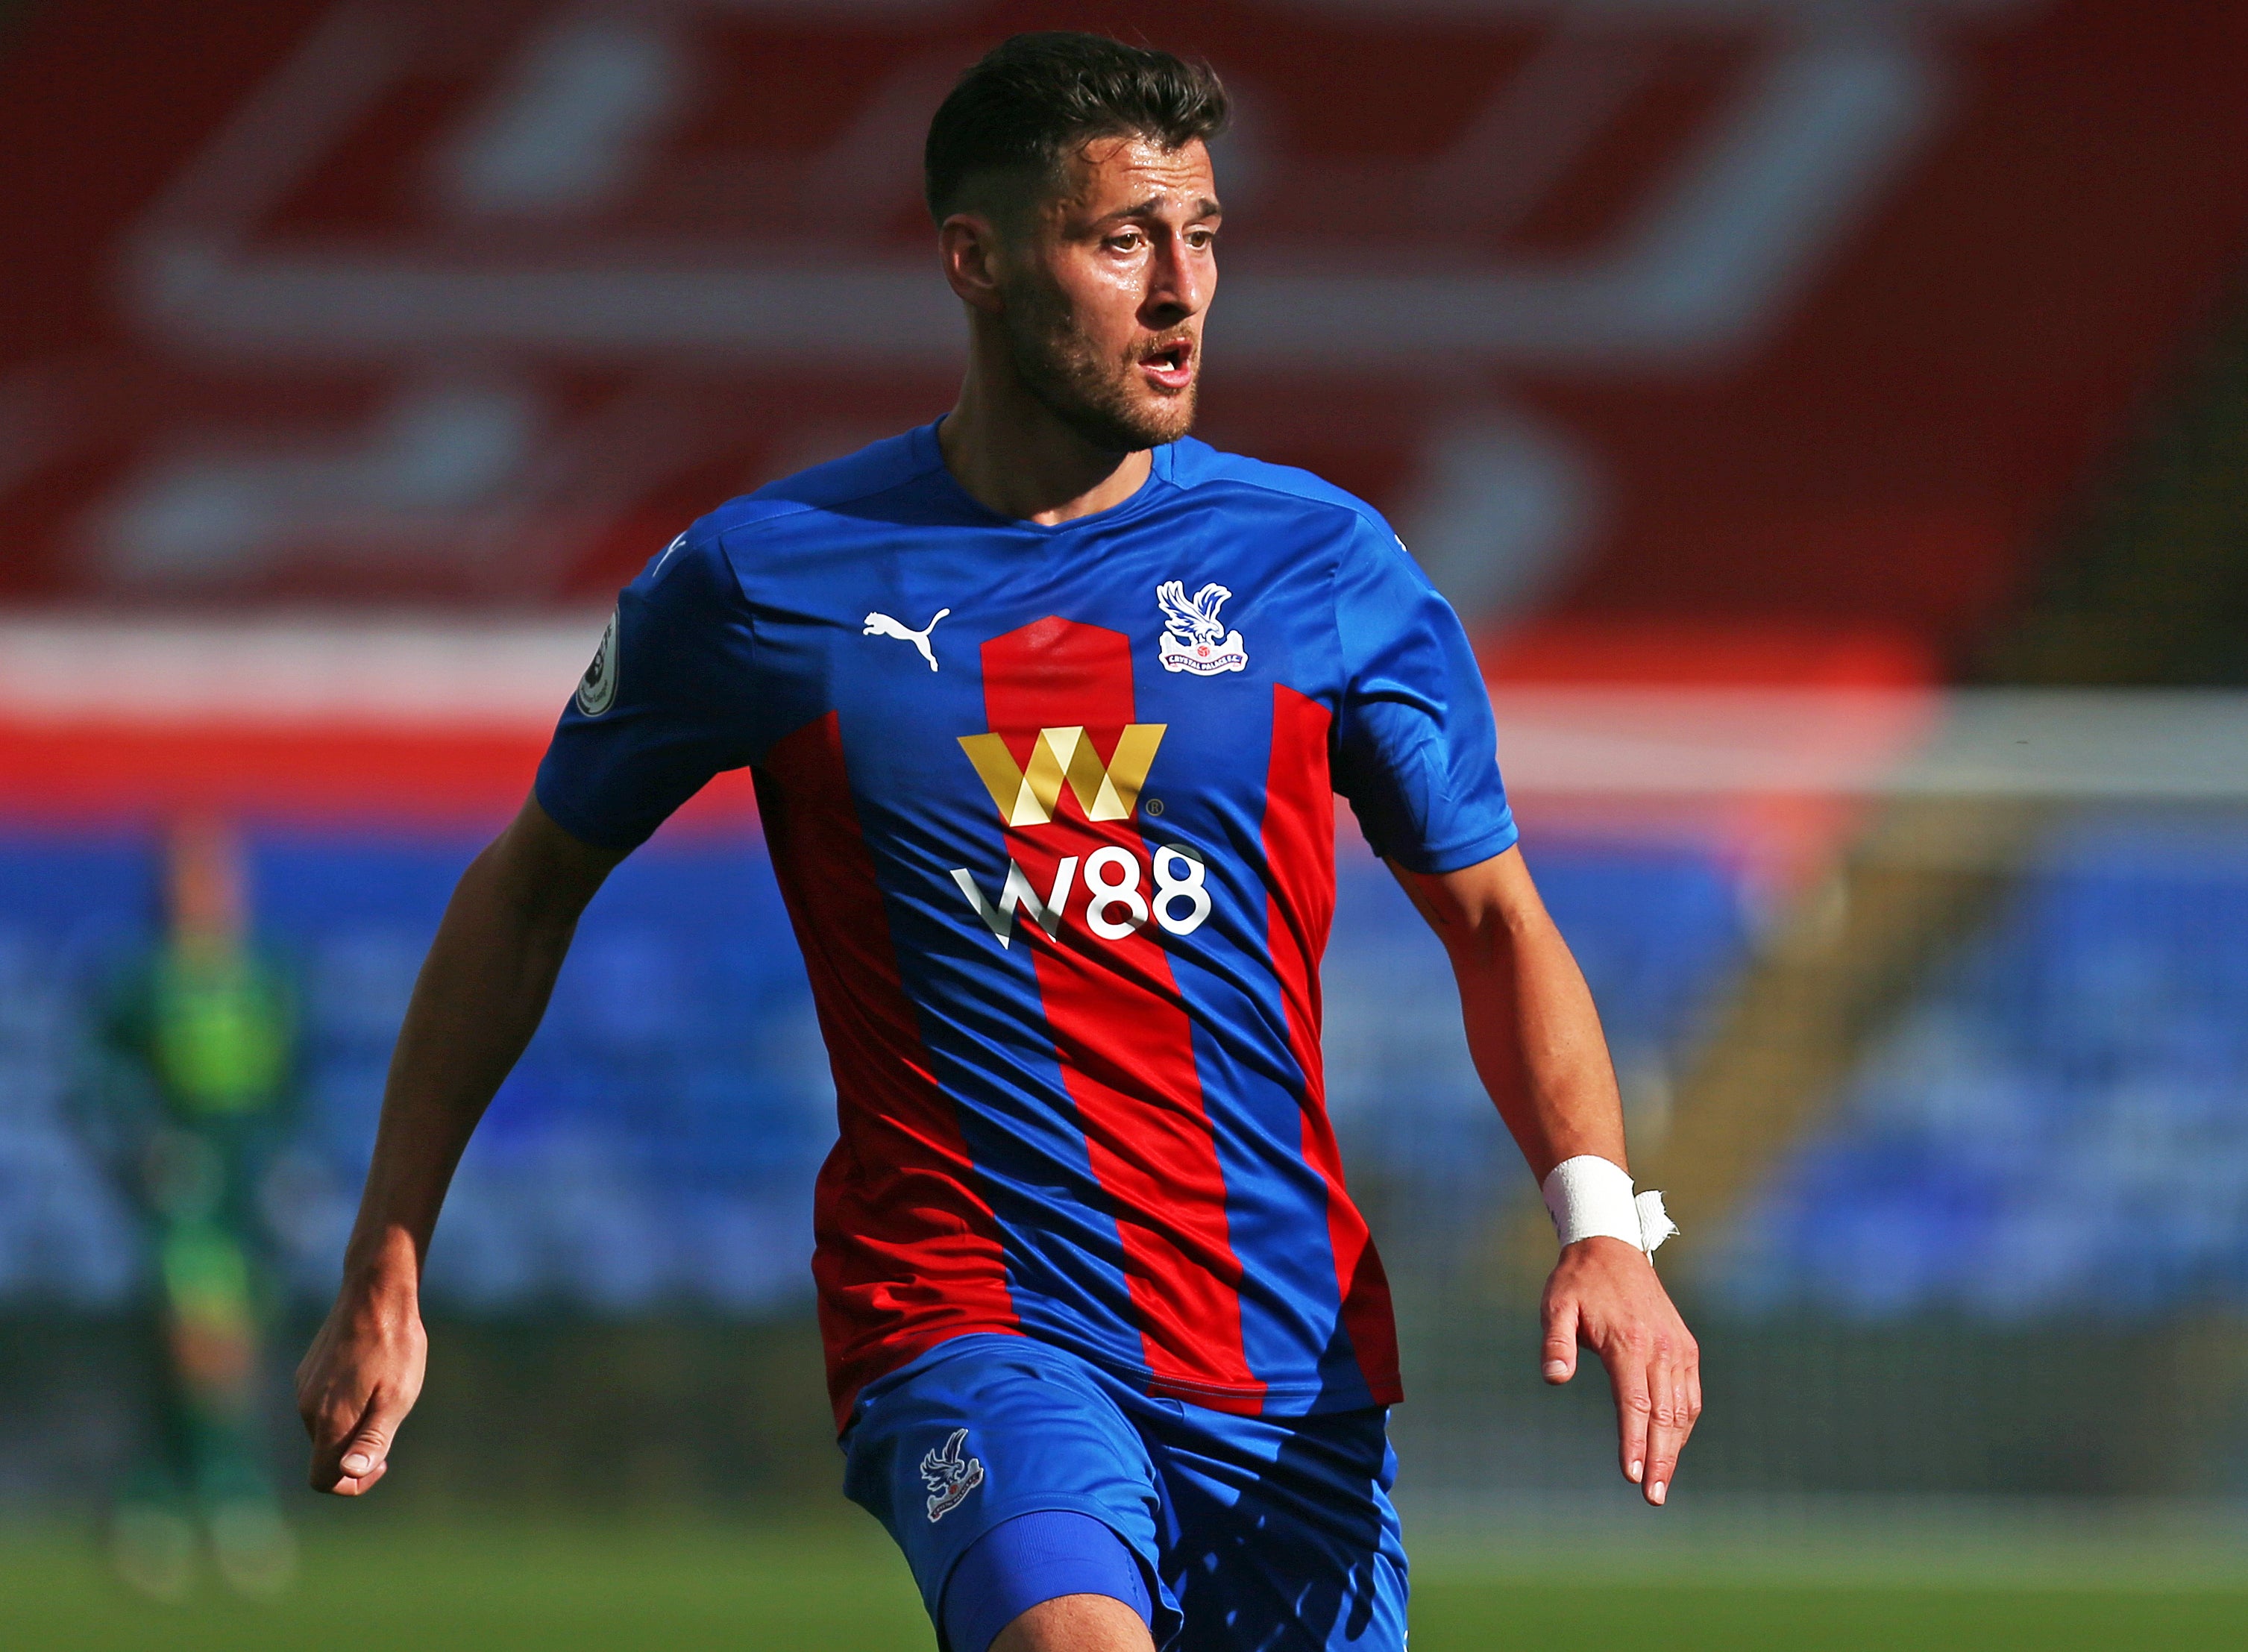 FA Cup: Crystal Palace come from behind to beat Millwall in the third round